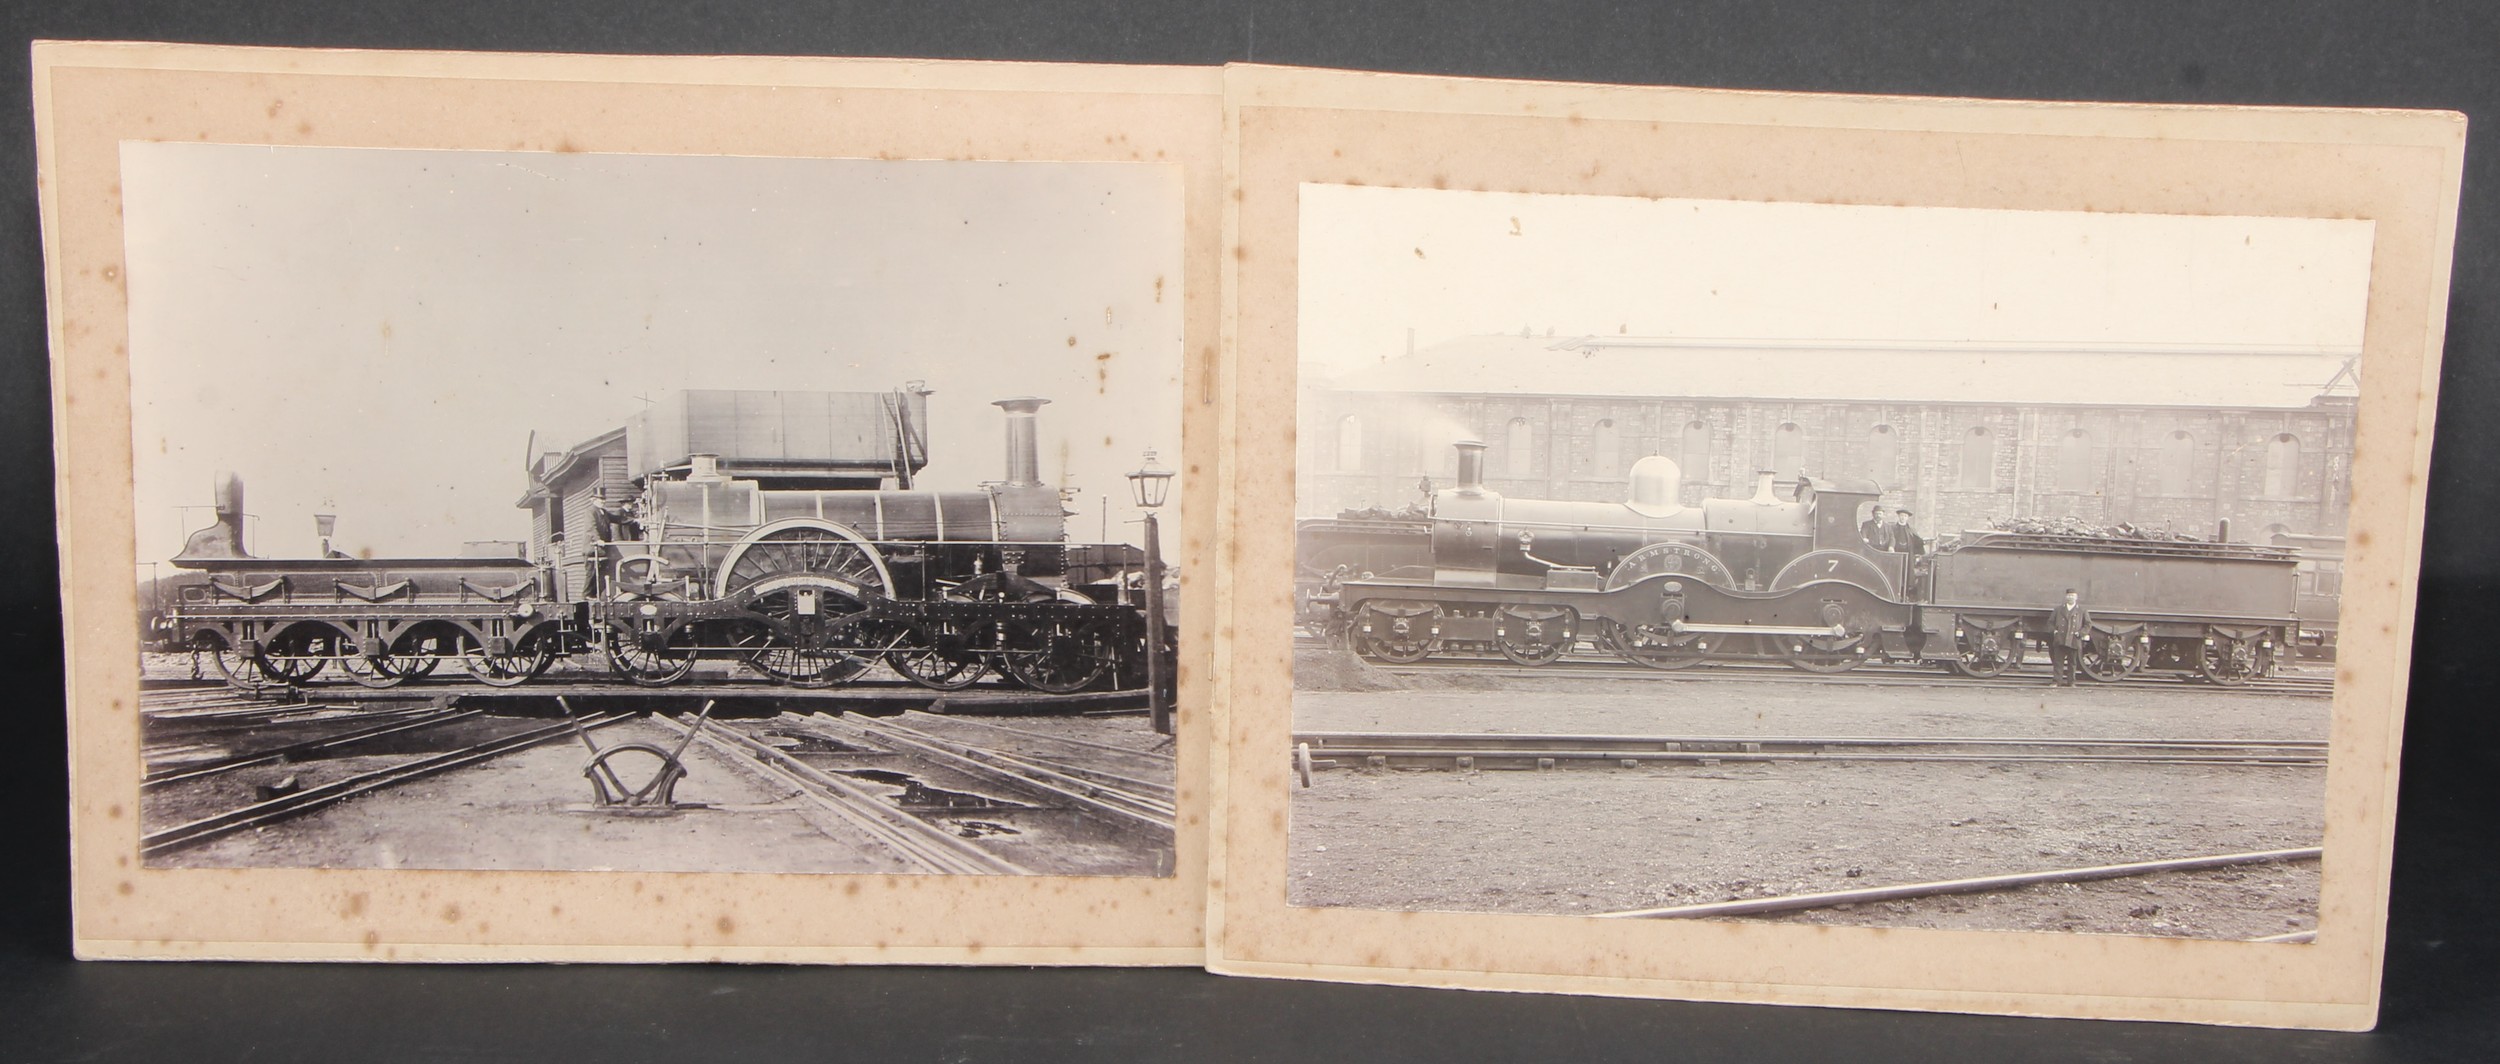 Photography - Railwayana - a collection of 19th century photographs of railway locomotives, many - Image 7 of 8